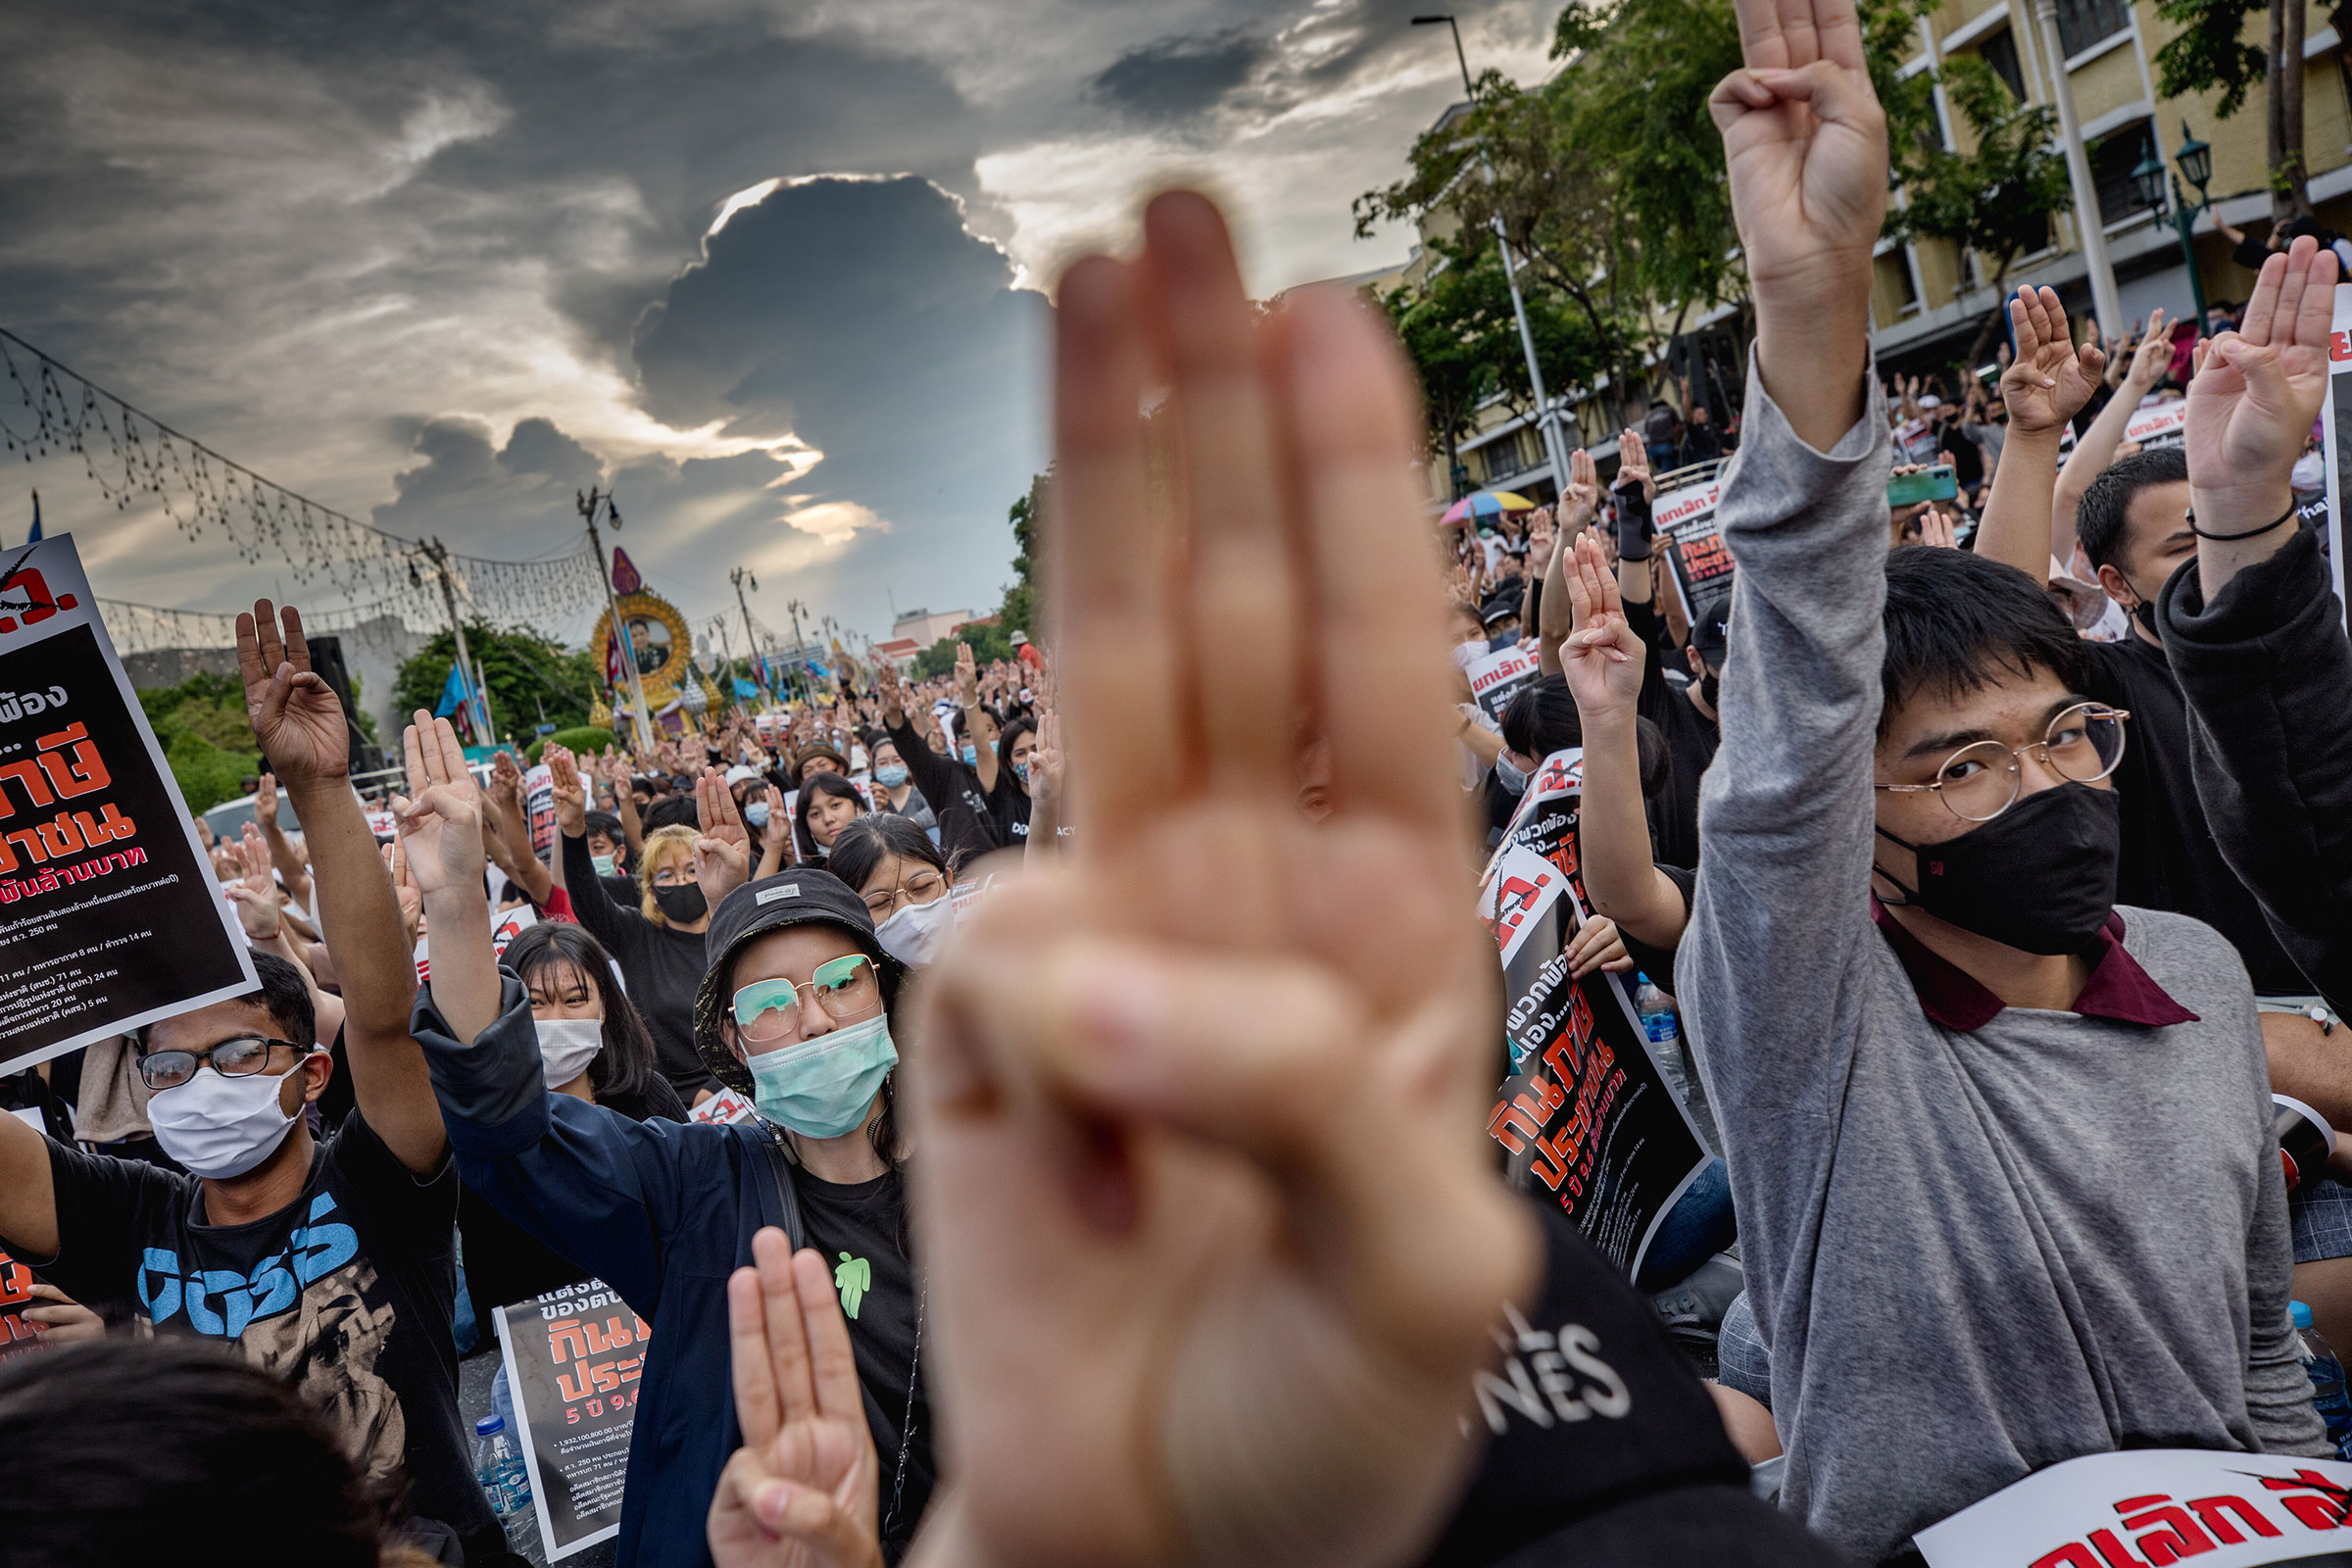 Protesters perform a 'Hunger Games' three finger salute during anti-government demonstration in Bangkok